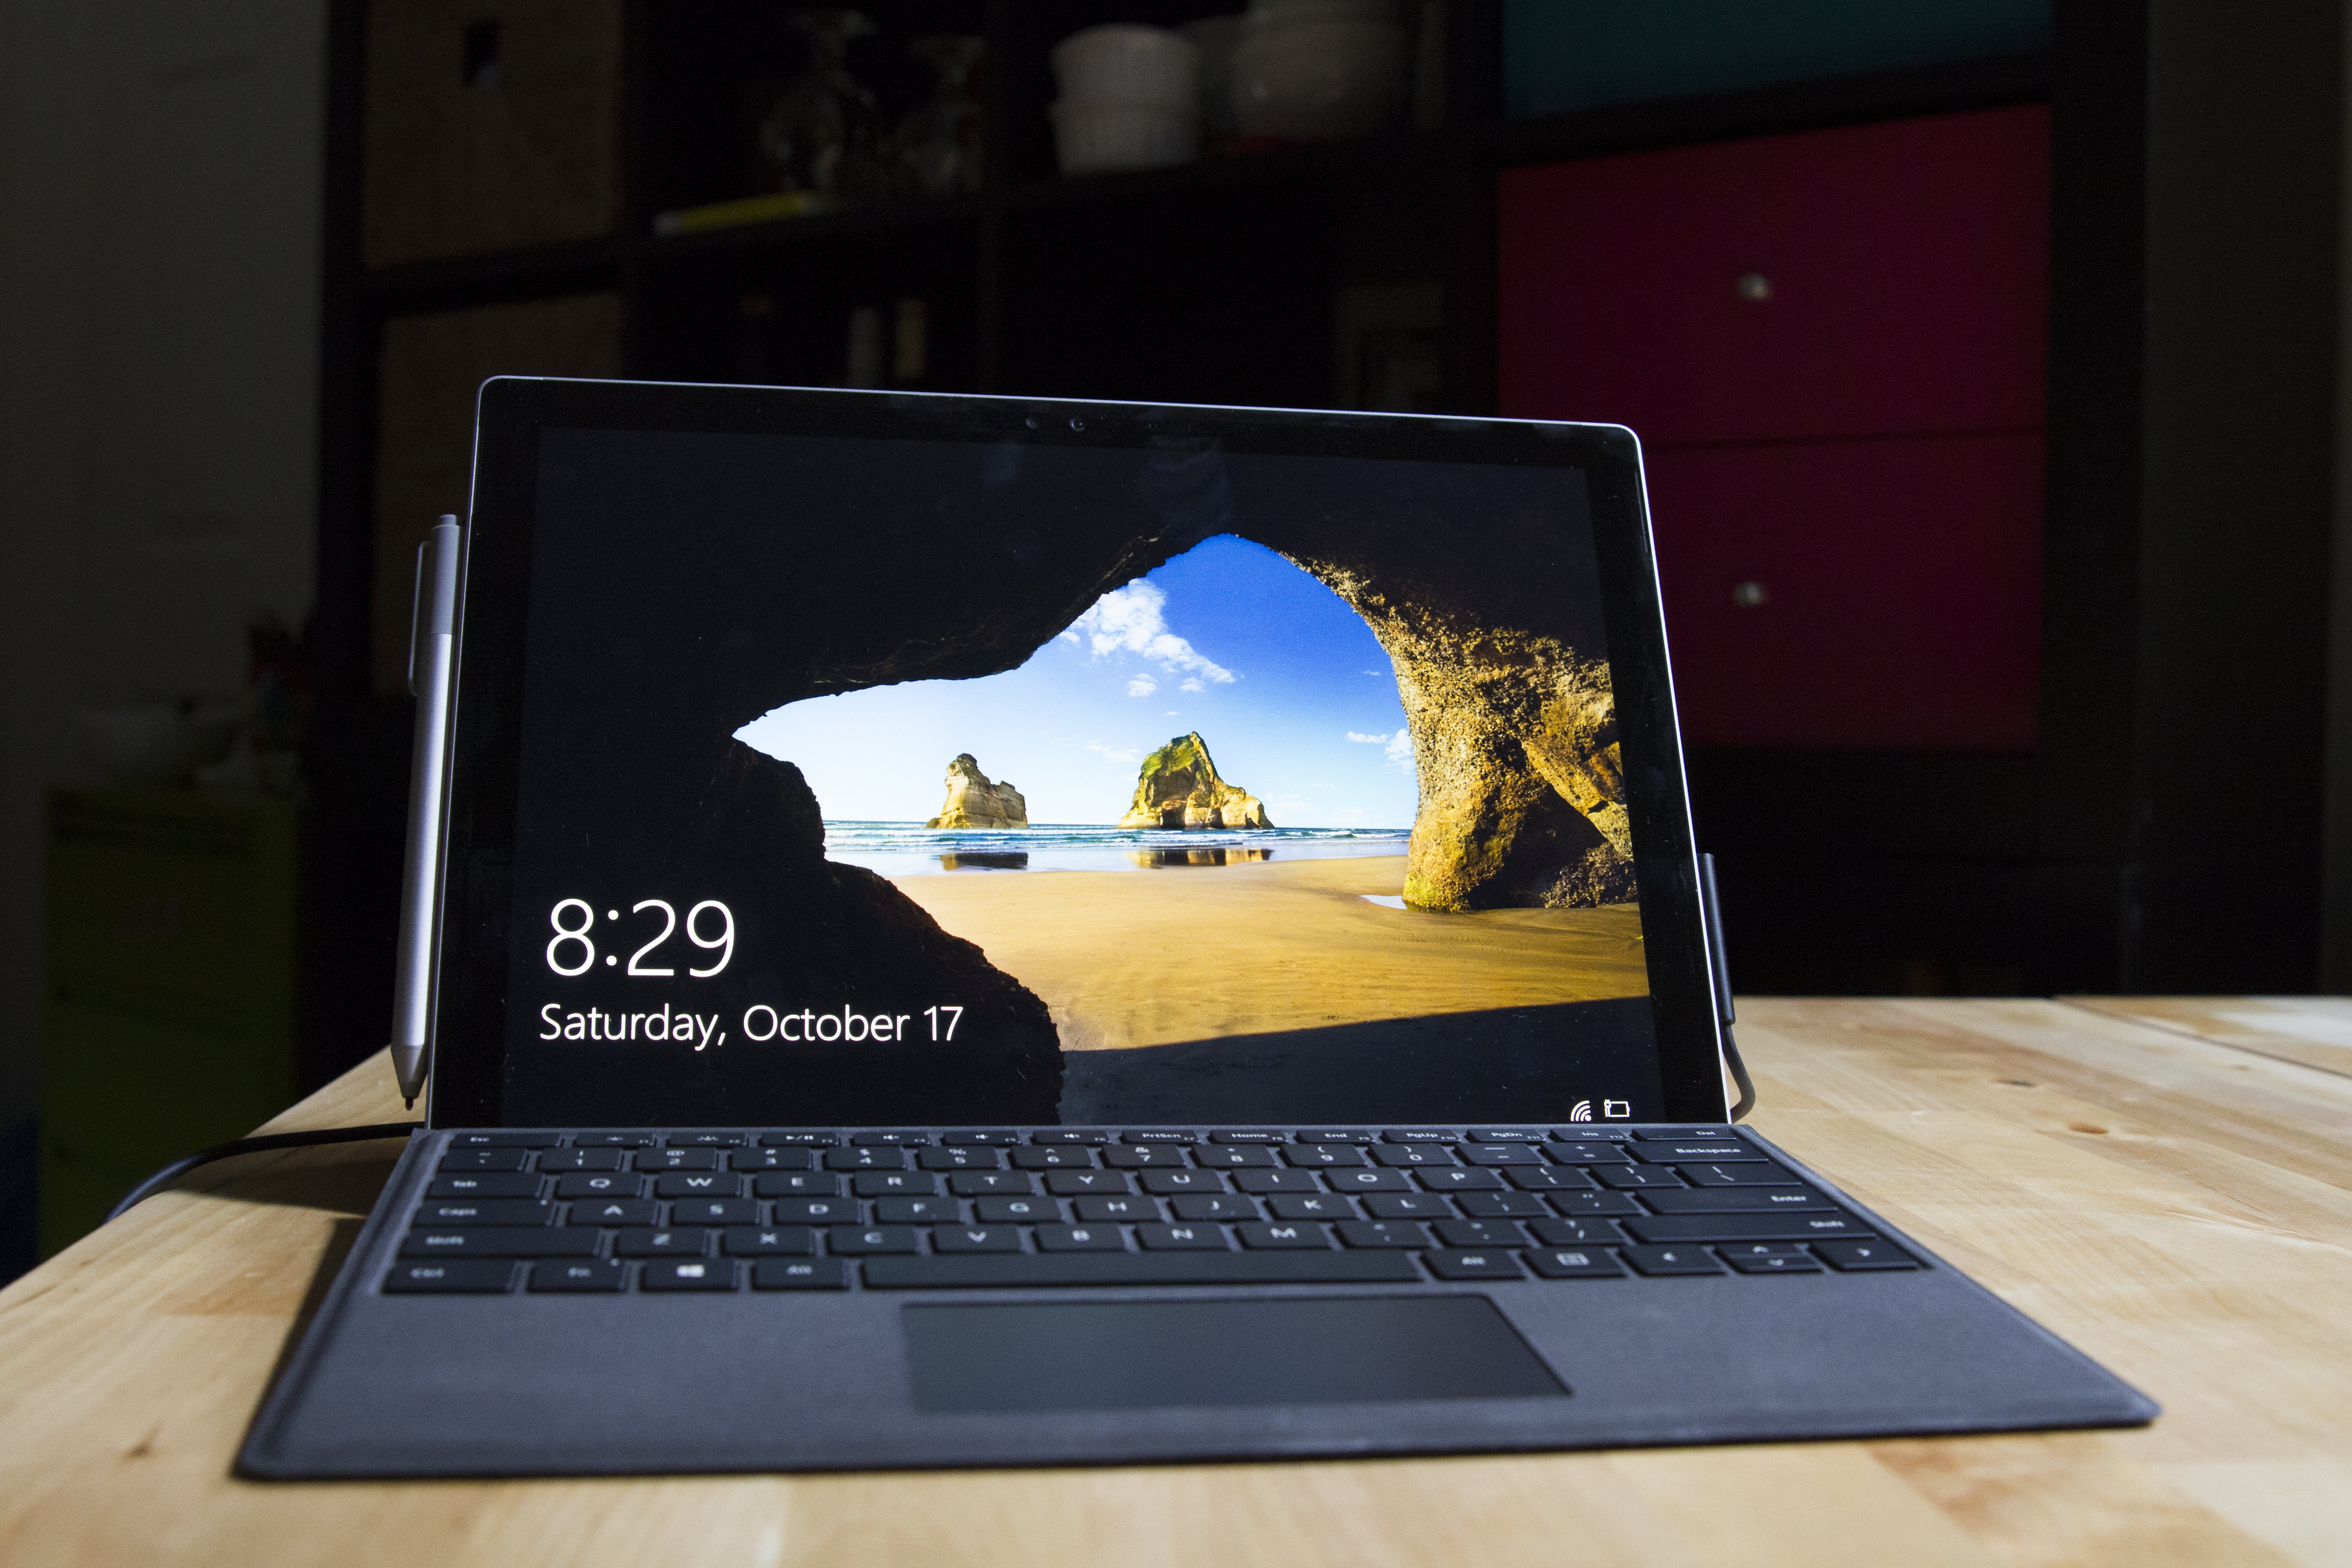 Hands-on with the Microsoft Surface Pro 4 tablet 